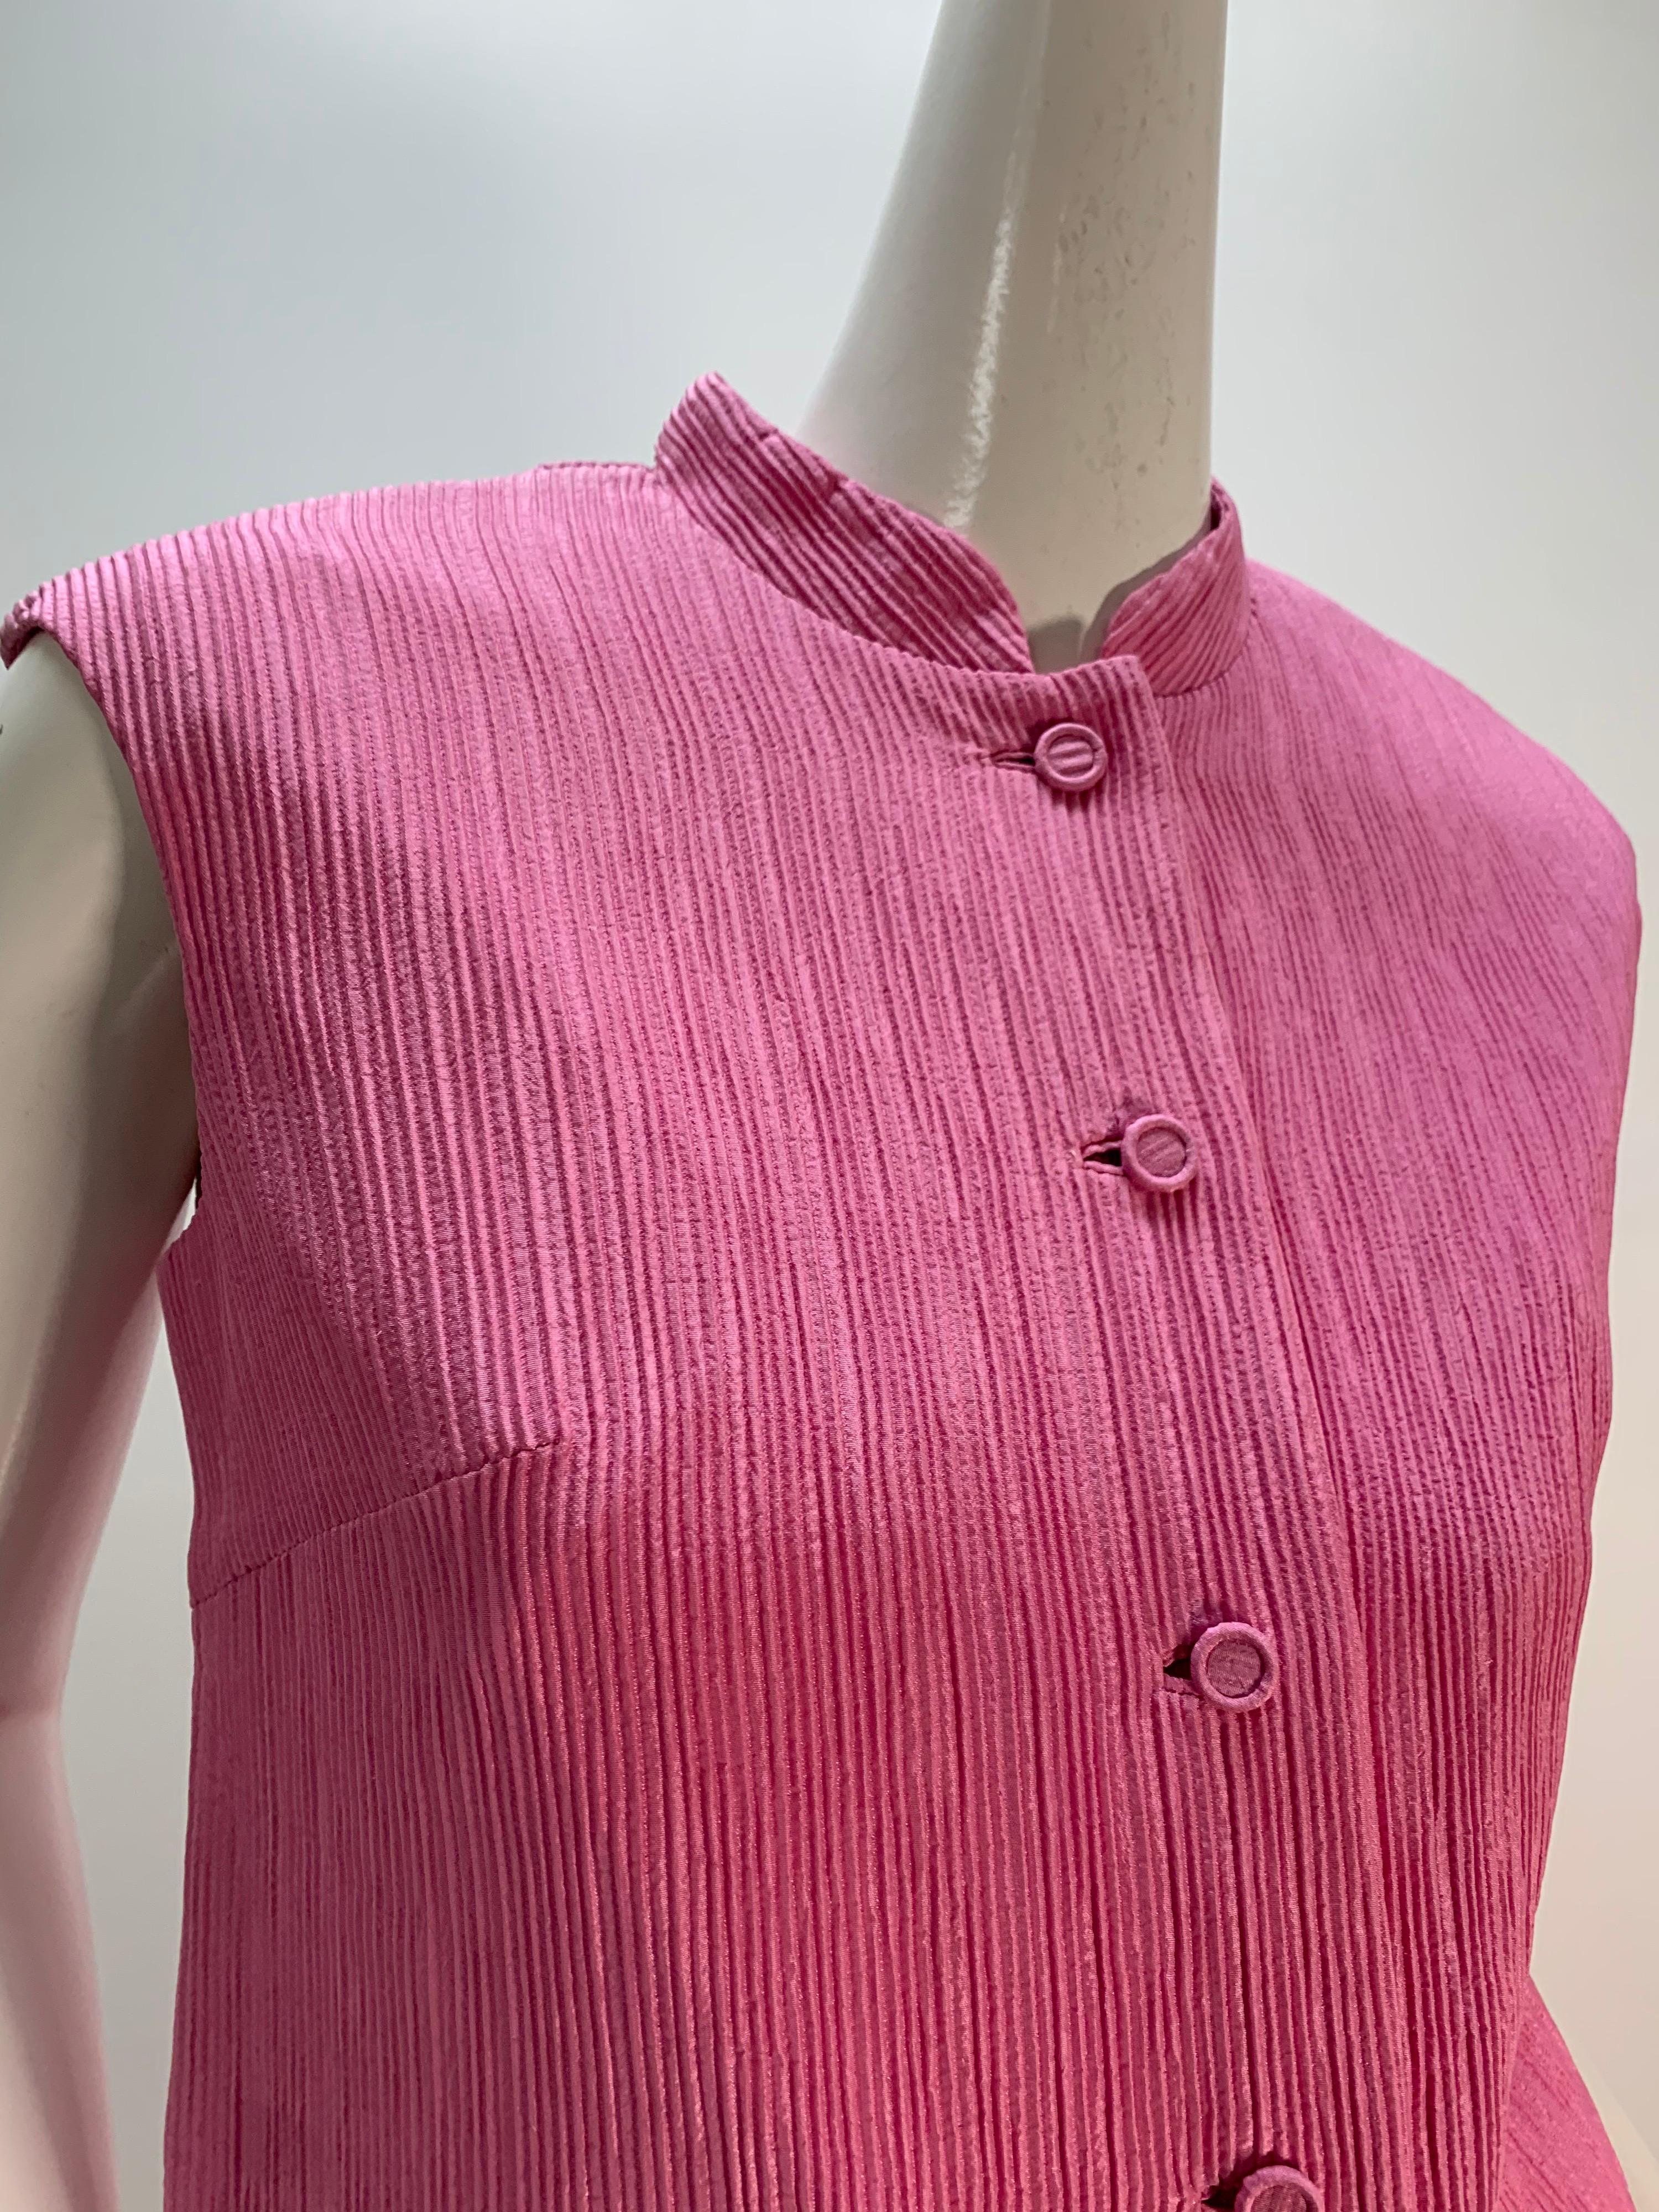 1960 Saks Pink Crinkle Capri Pant & Nehru Tunic Ensemble In New Condition For Sale In Gresham, OR